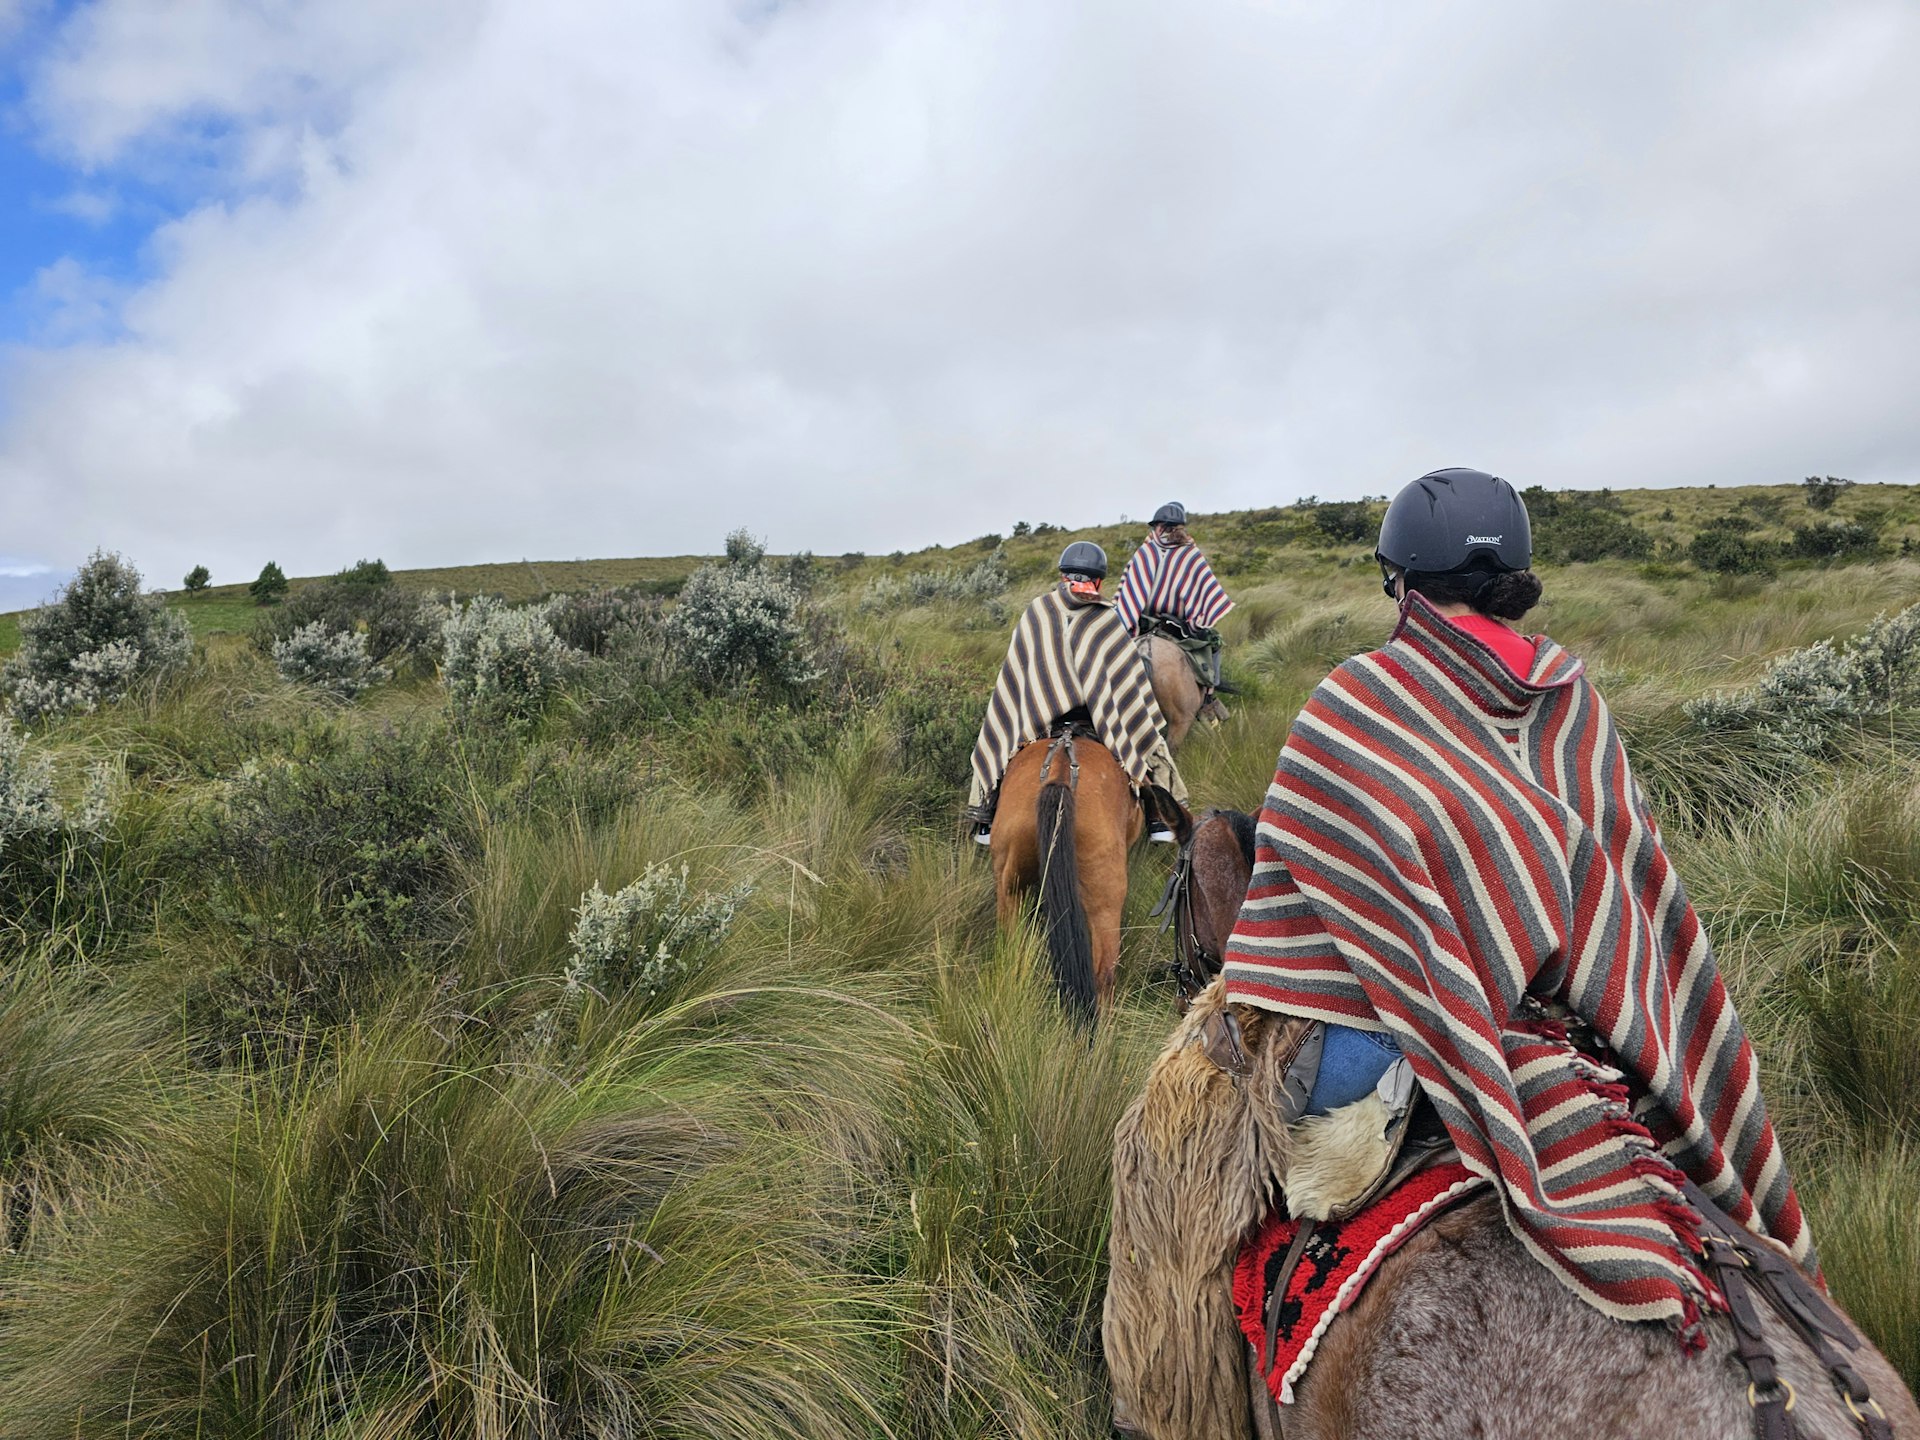 Three horseback riders, all wearing striped ponchos and riding hats, ride through long grass